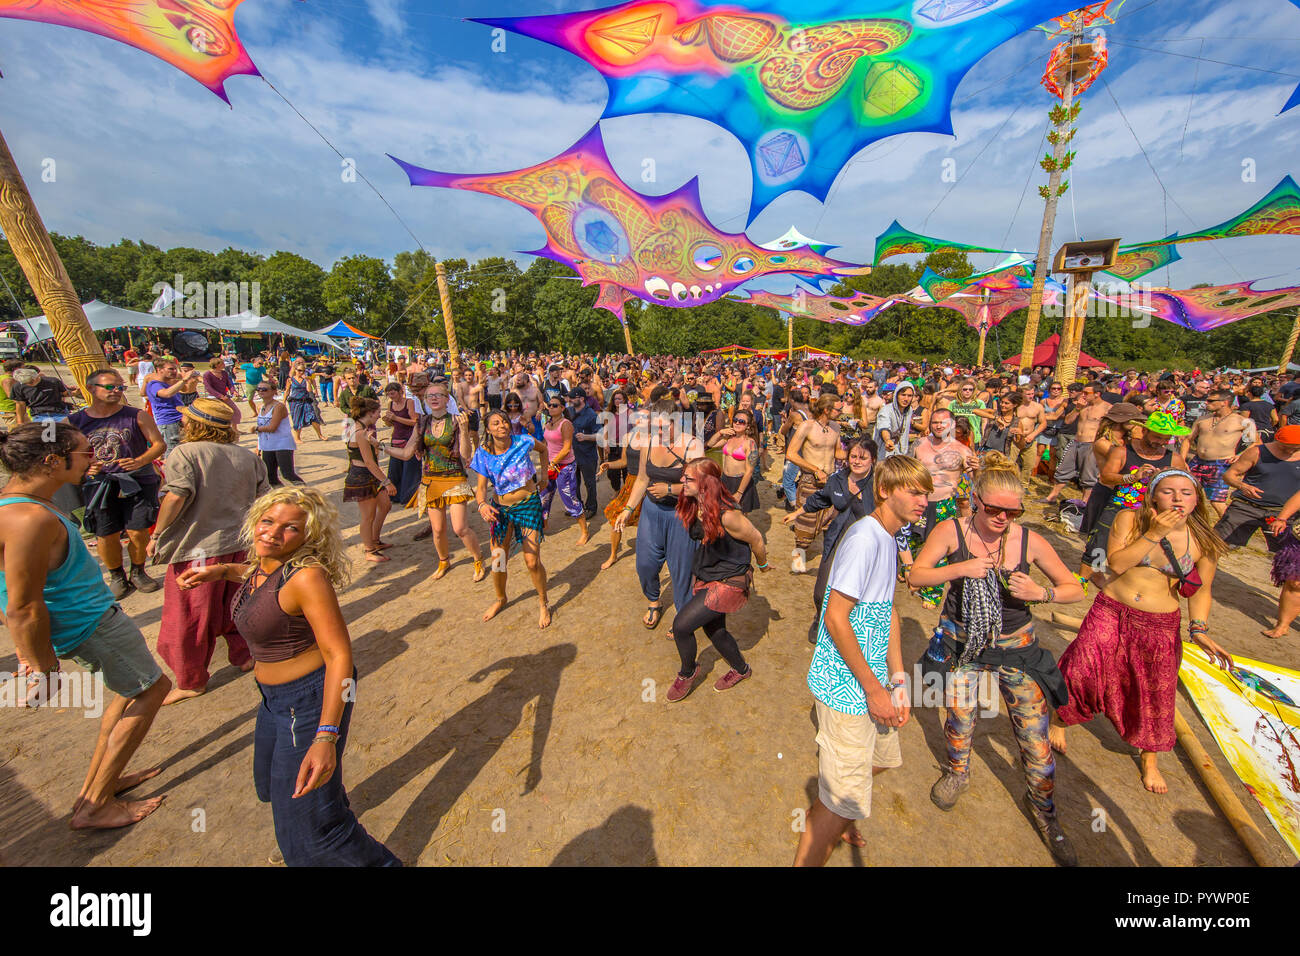 LEEUWARDEN, NETHERLANDS-AUGUST 30, 2015: Colorful party people on the dance floor at Psy-Fi open air psychedelic trance music Festival Stock Photo